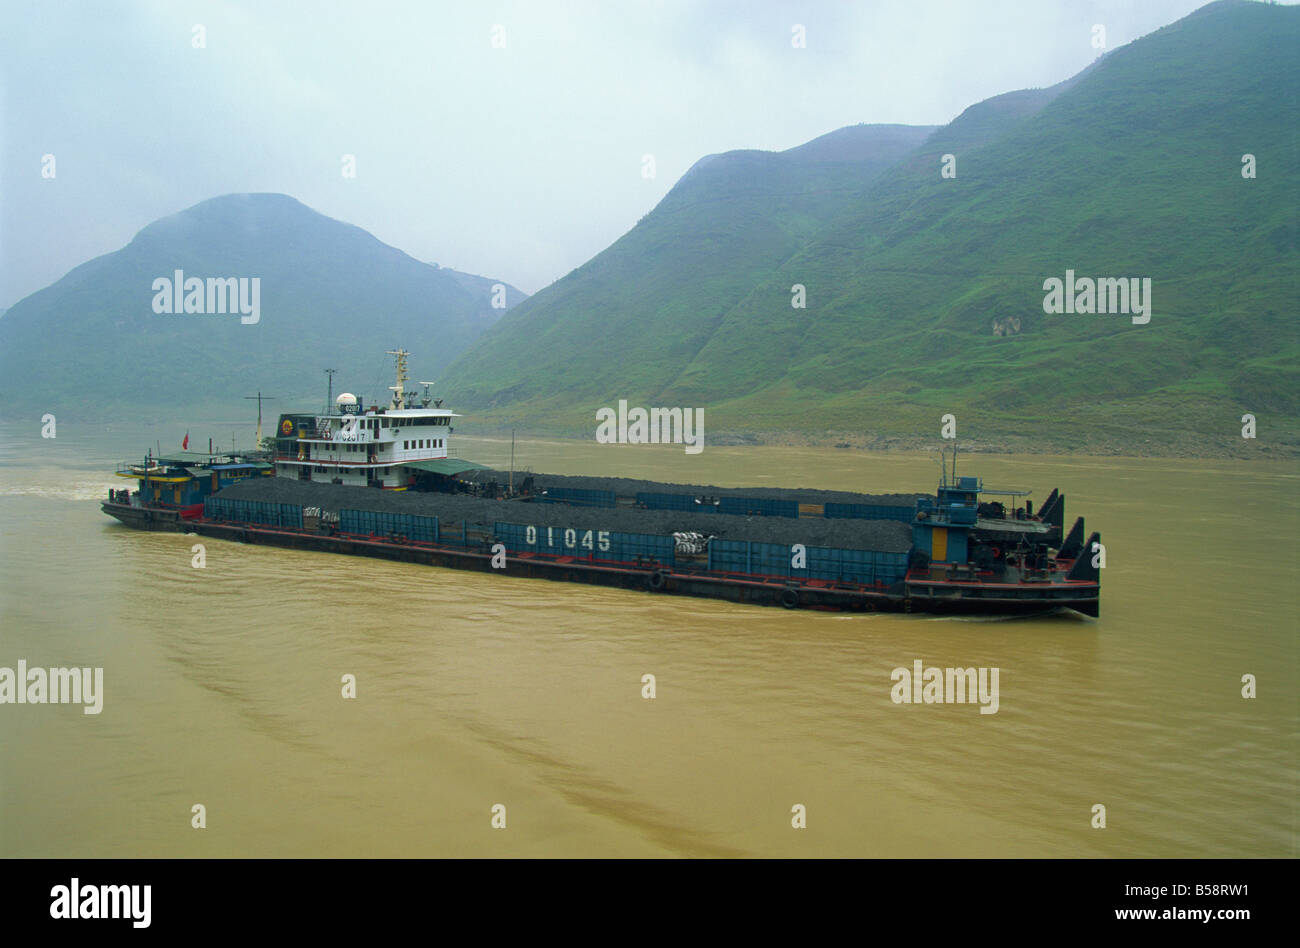 Coal barge on the scenic Three Gorges section of the Yangzi River between Wanxian and Yichang, China Stock Photo